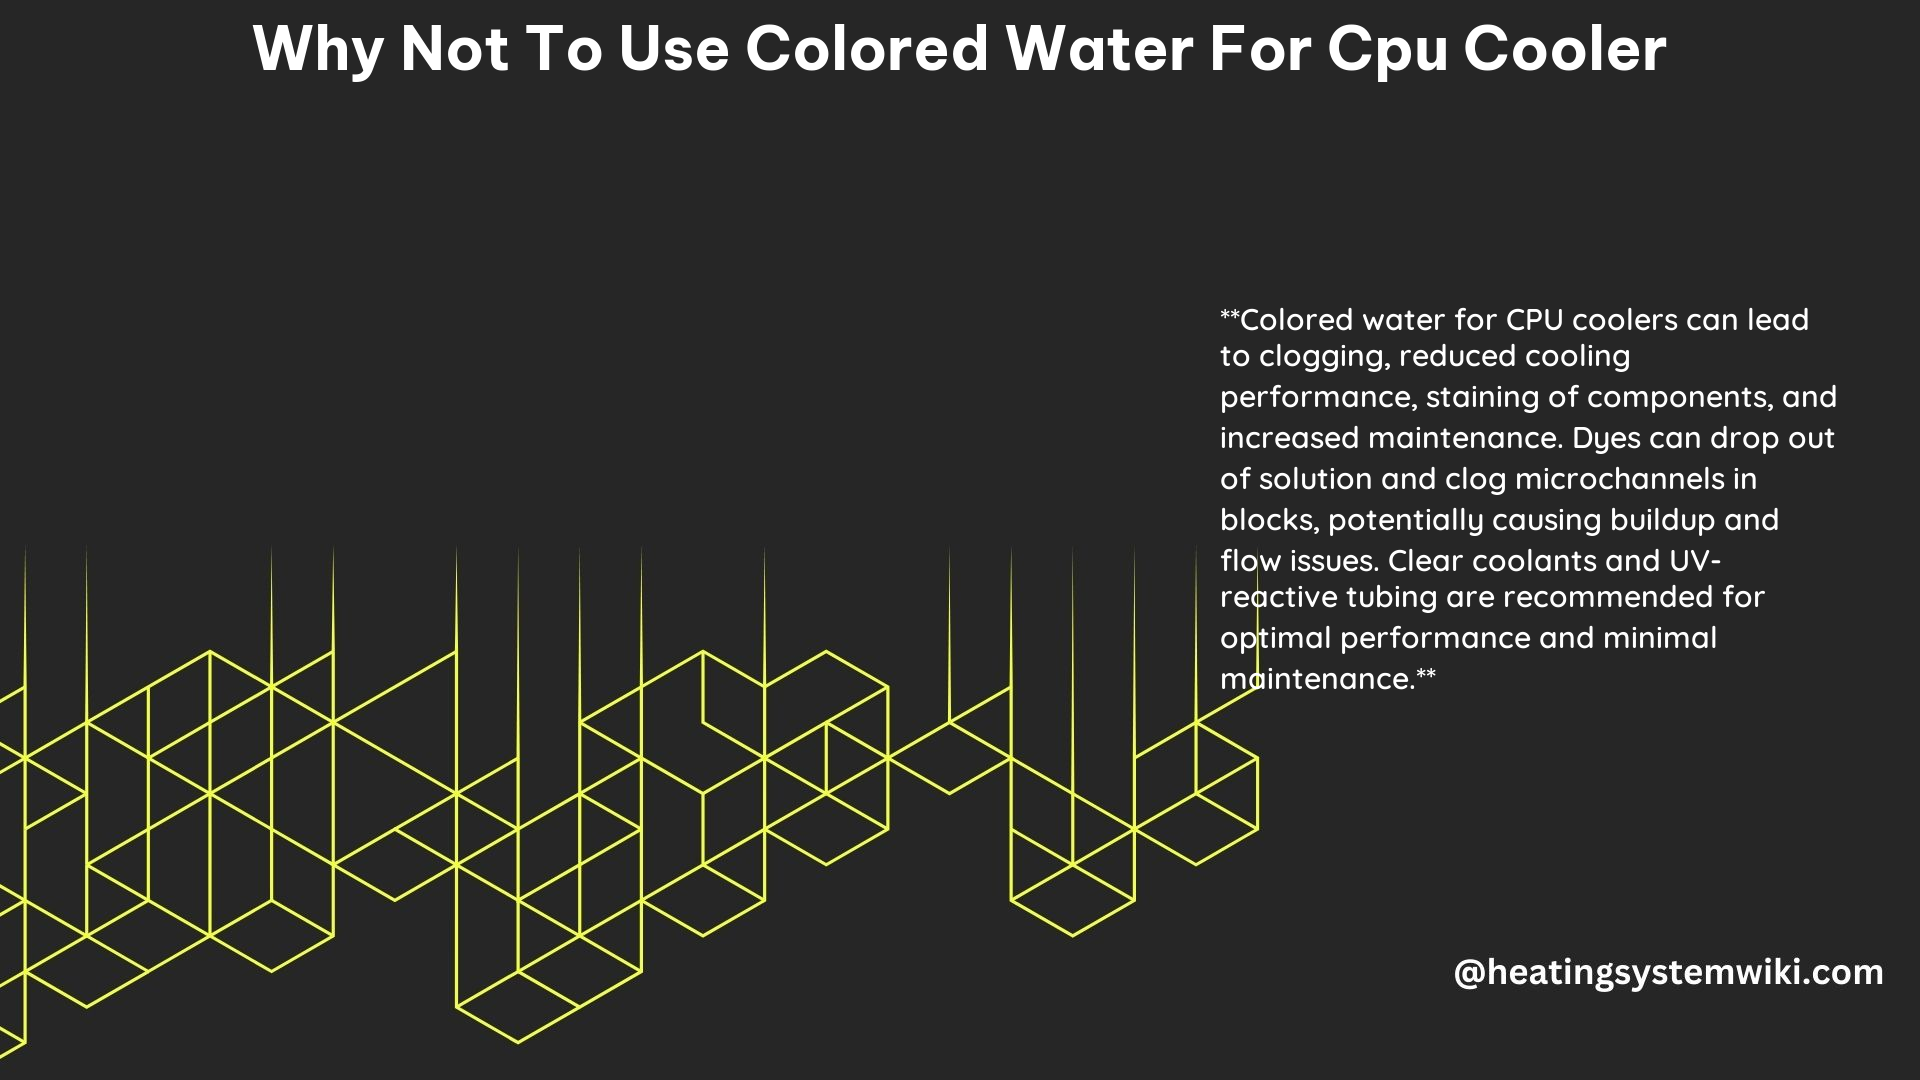 Why Not to Use Colored Water for CPU Cooler